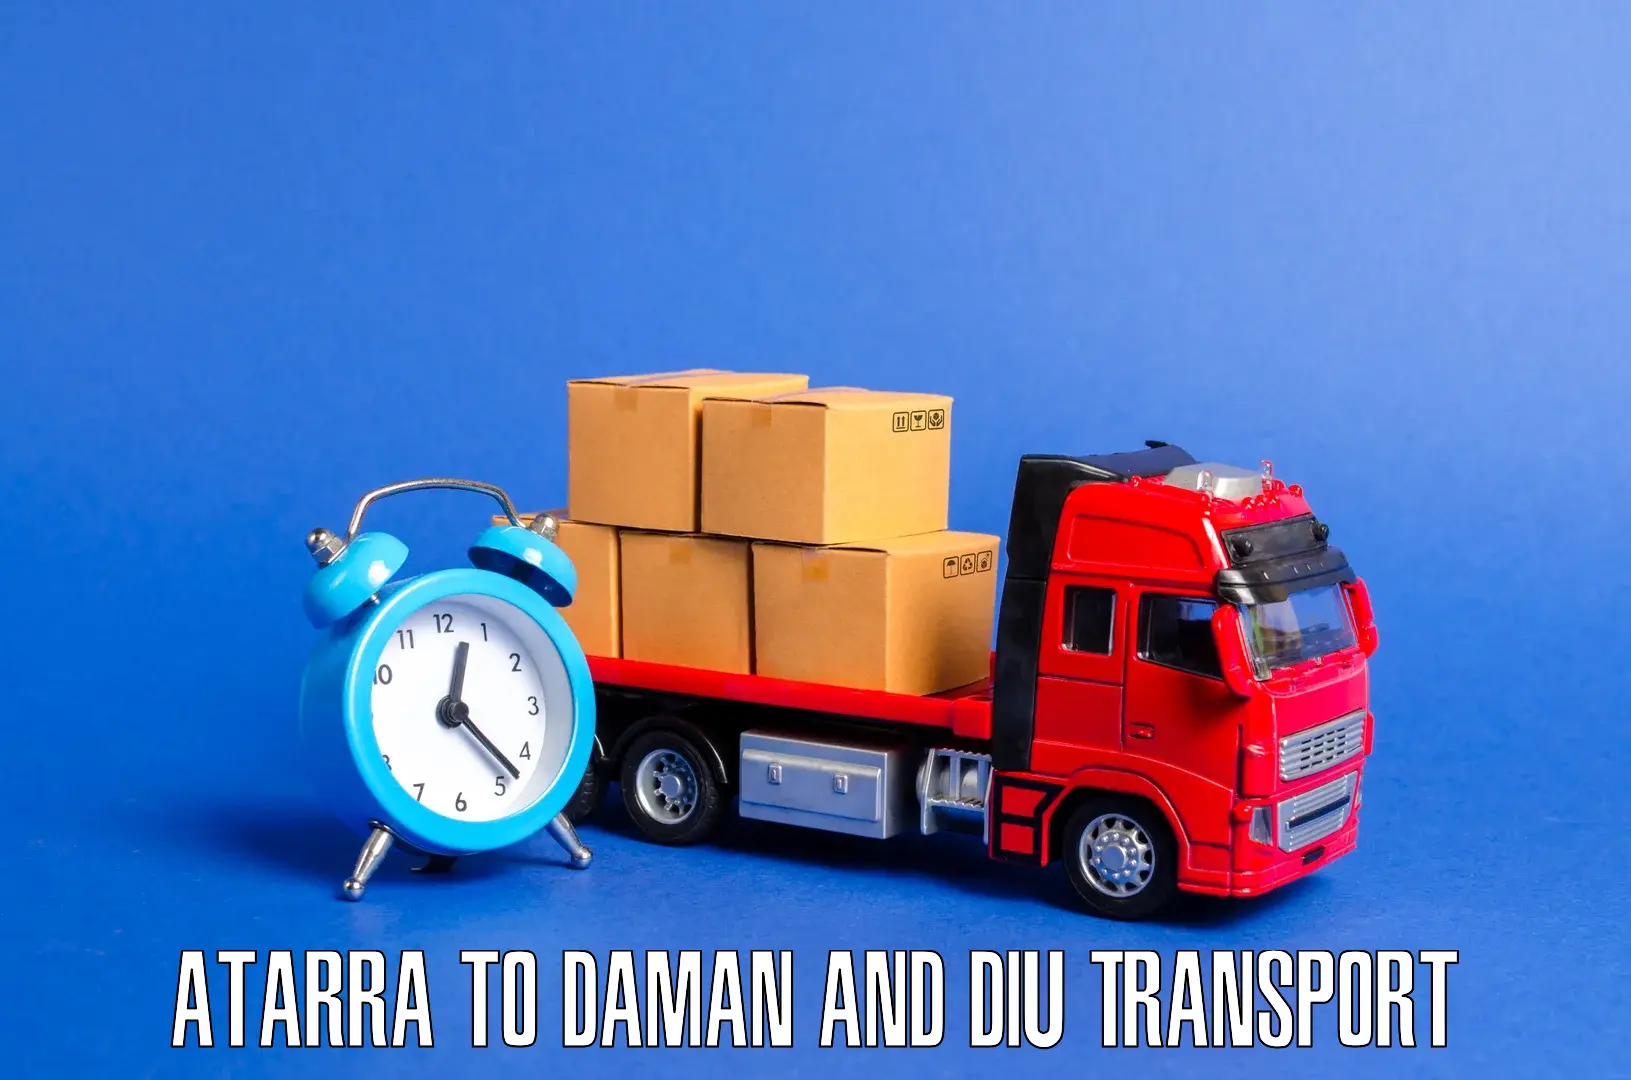 Transport bike from one state to another Atarra to Daman and Diu